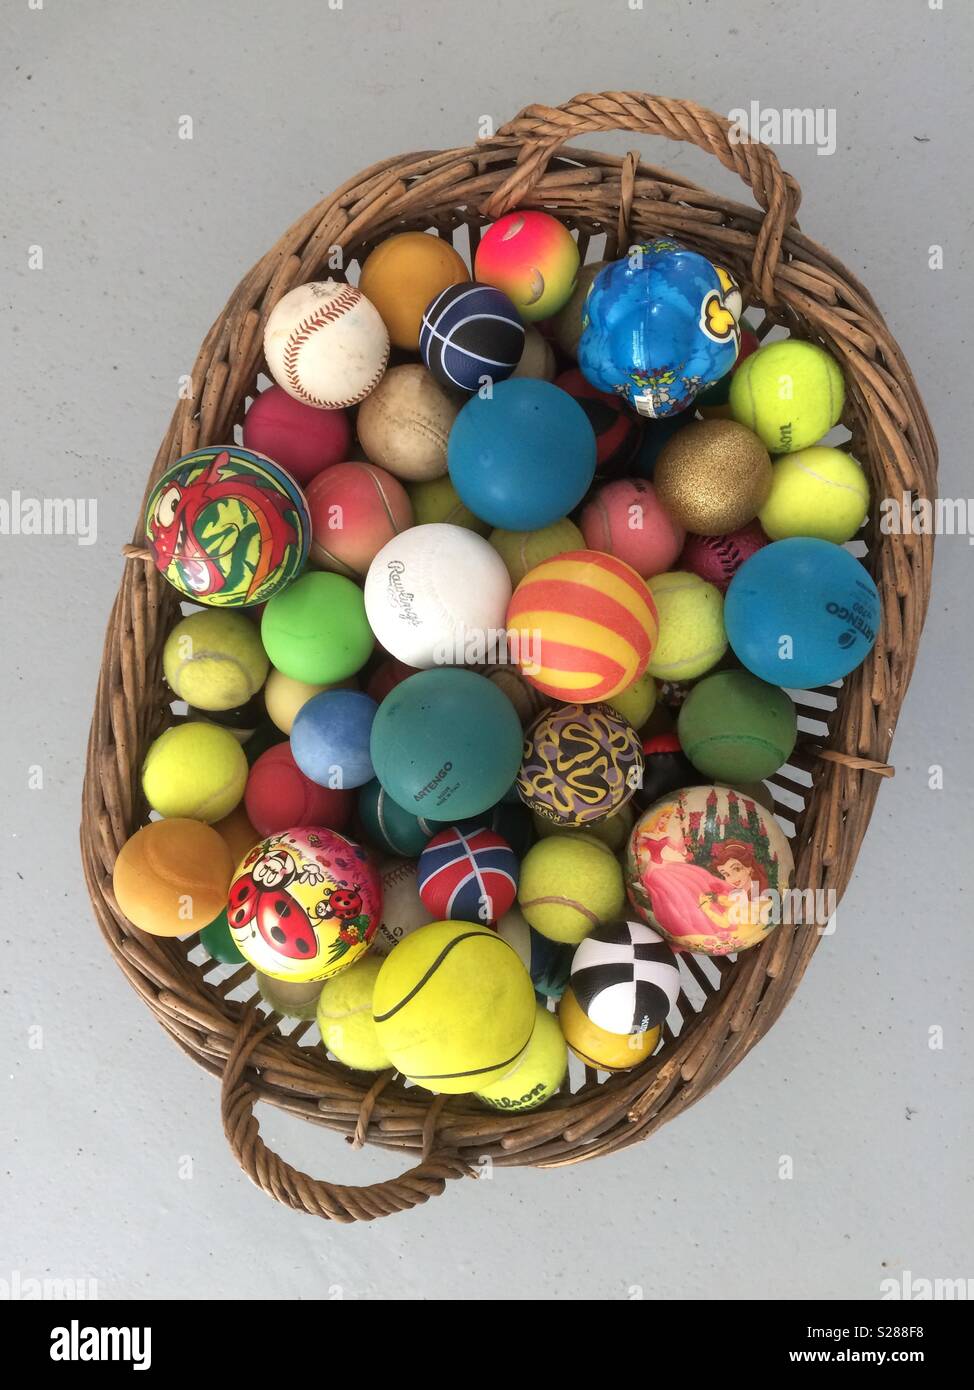 Multicolored yarn balls in a straw basket on a wooden table Stock Photo by  ©annakukhmar 40790863